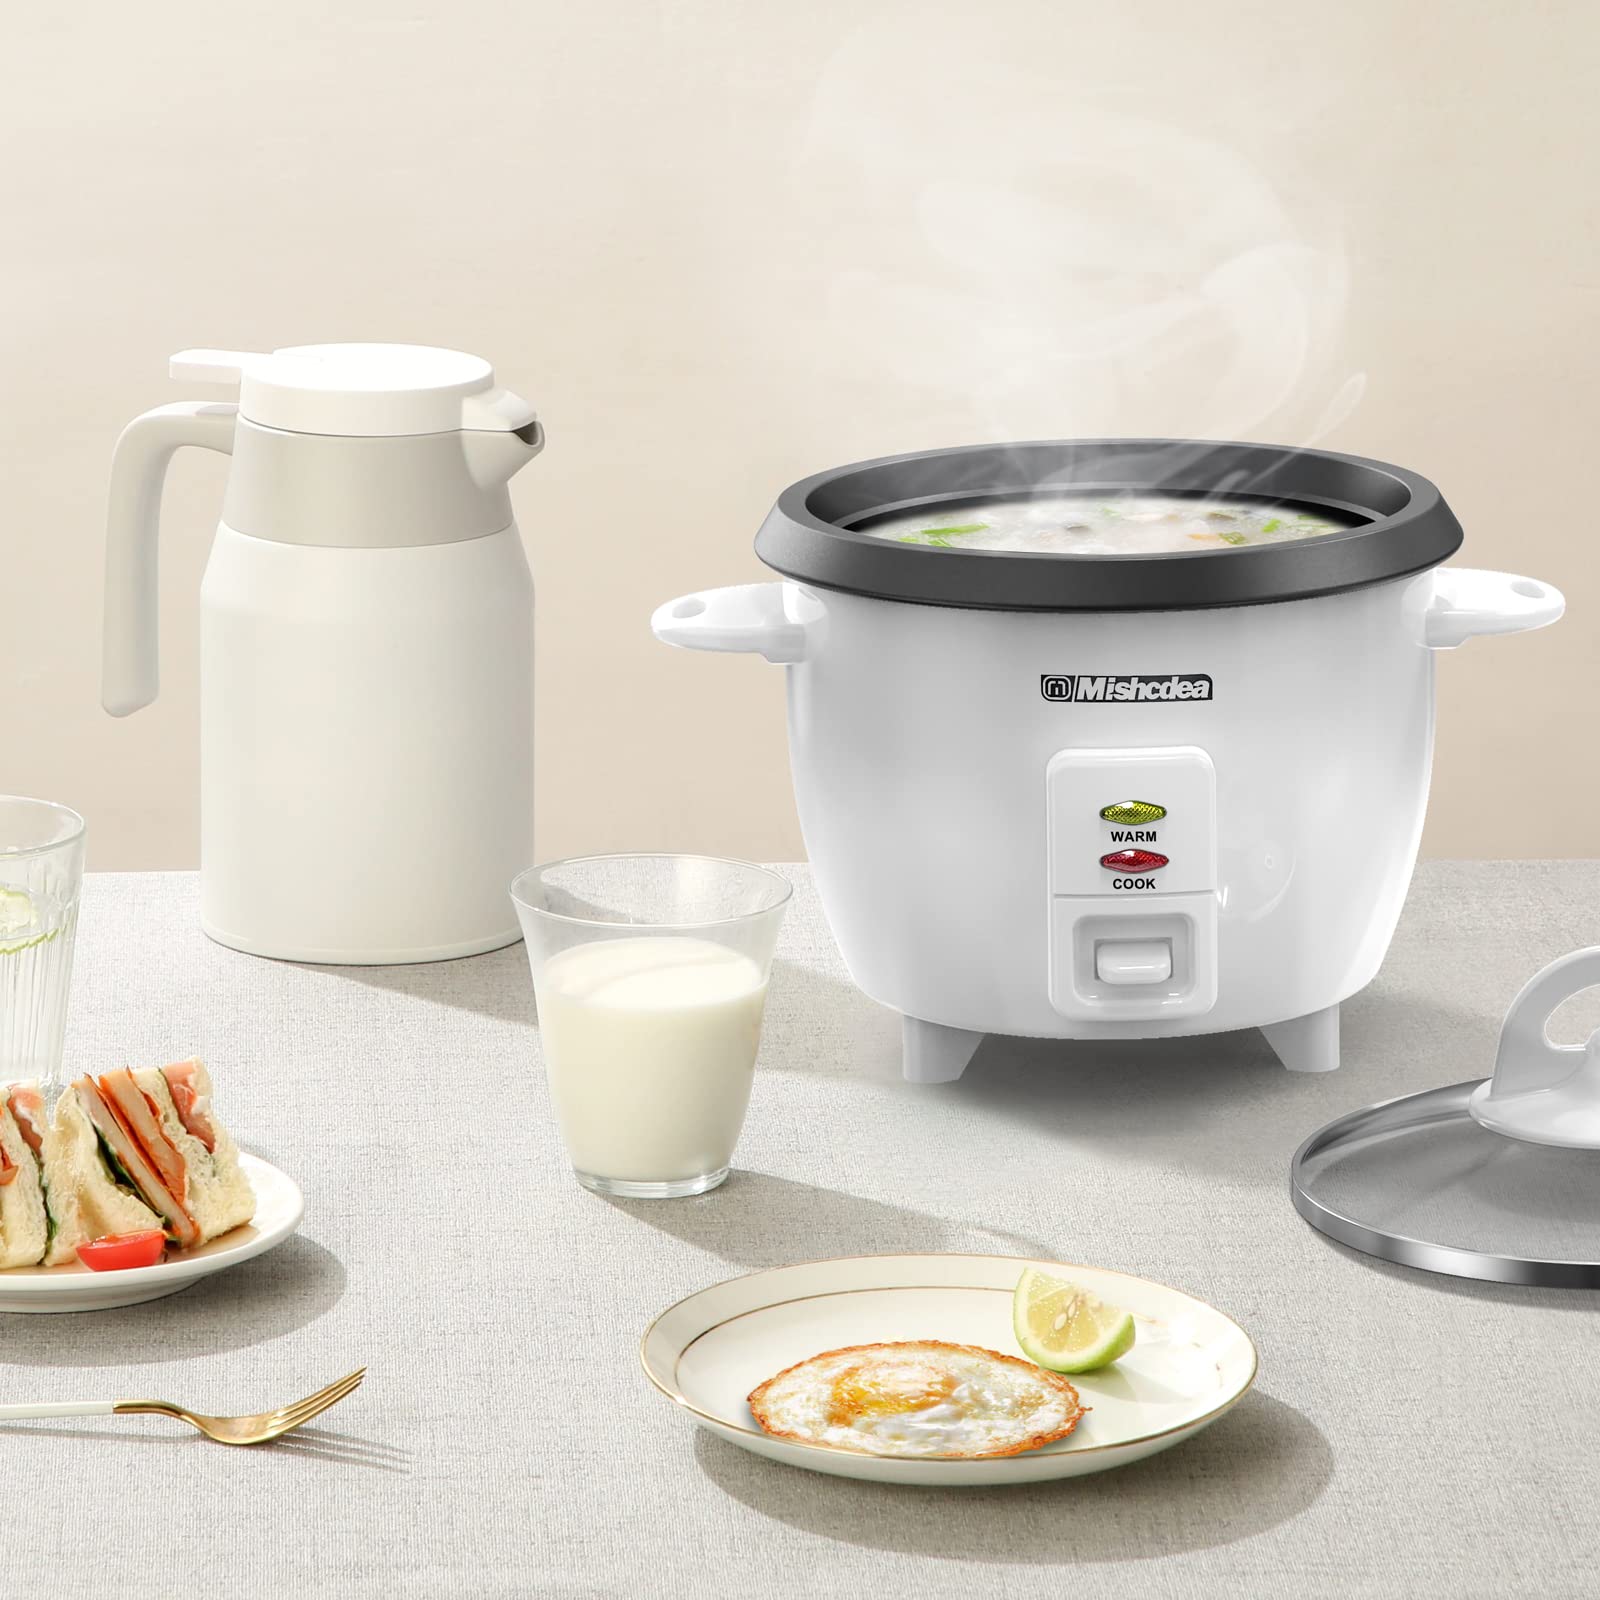 Mishcdea Rice Cooker 10 Cups Uncooked & Food Steamer (20 Cooked), Electric Rice Cooker Fast Cooking With Keep Warm, Removable Non-stick Pot, All-In-One Cooker for Grains, Soups, Oatmeal or Veggies - White